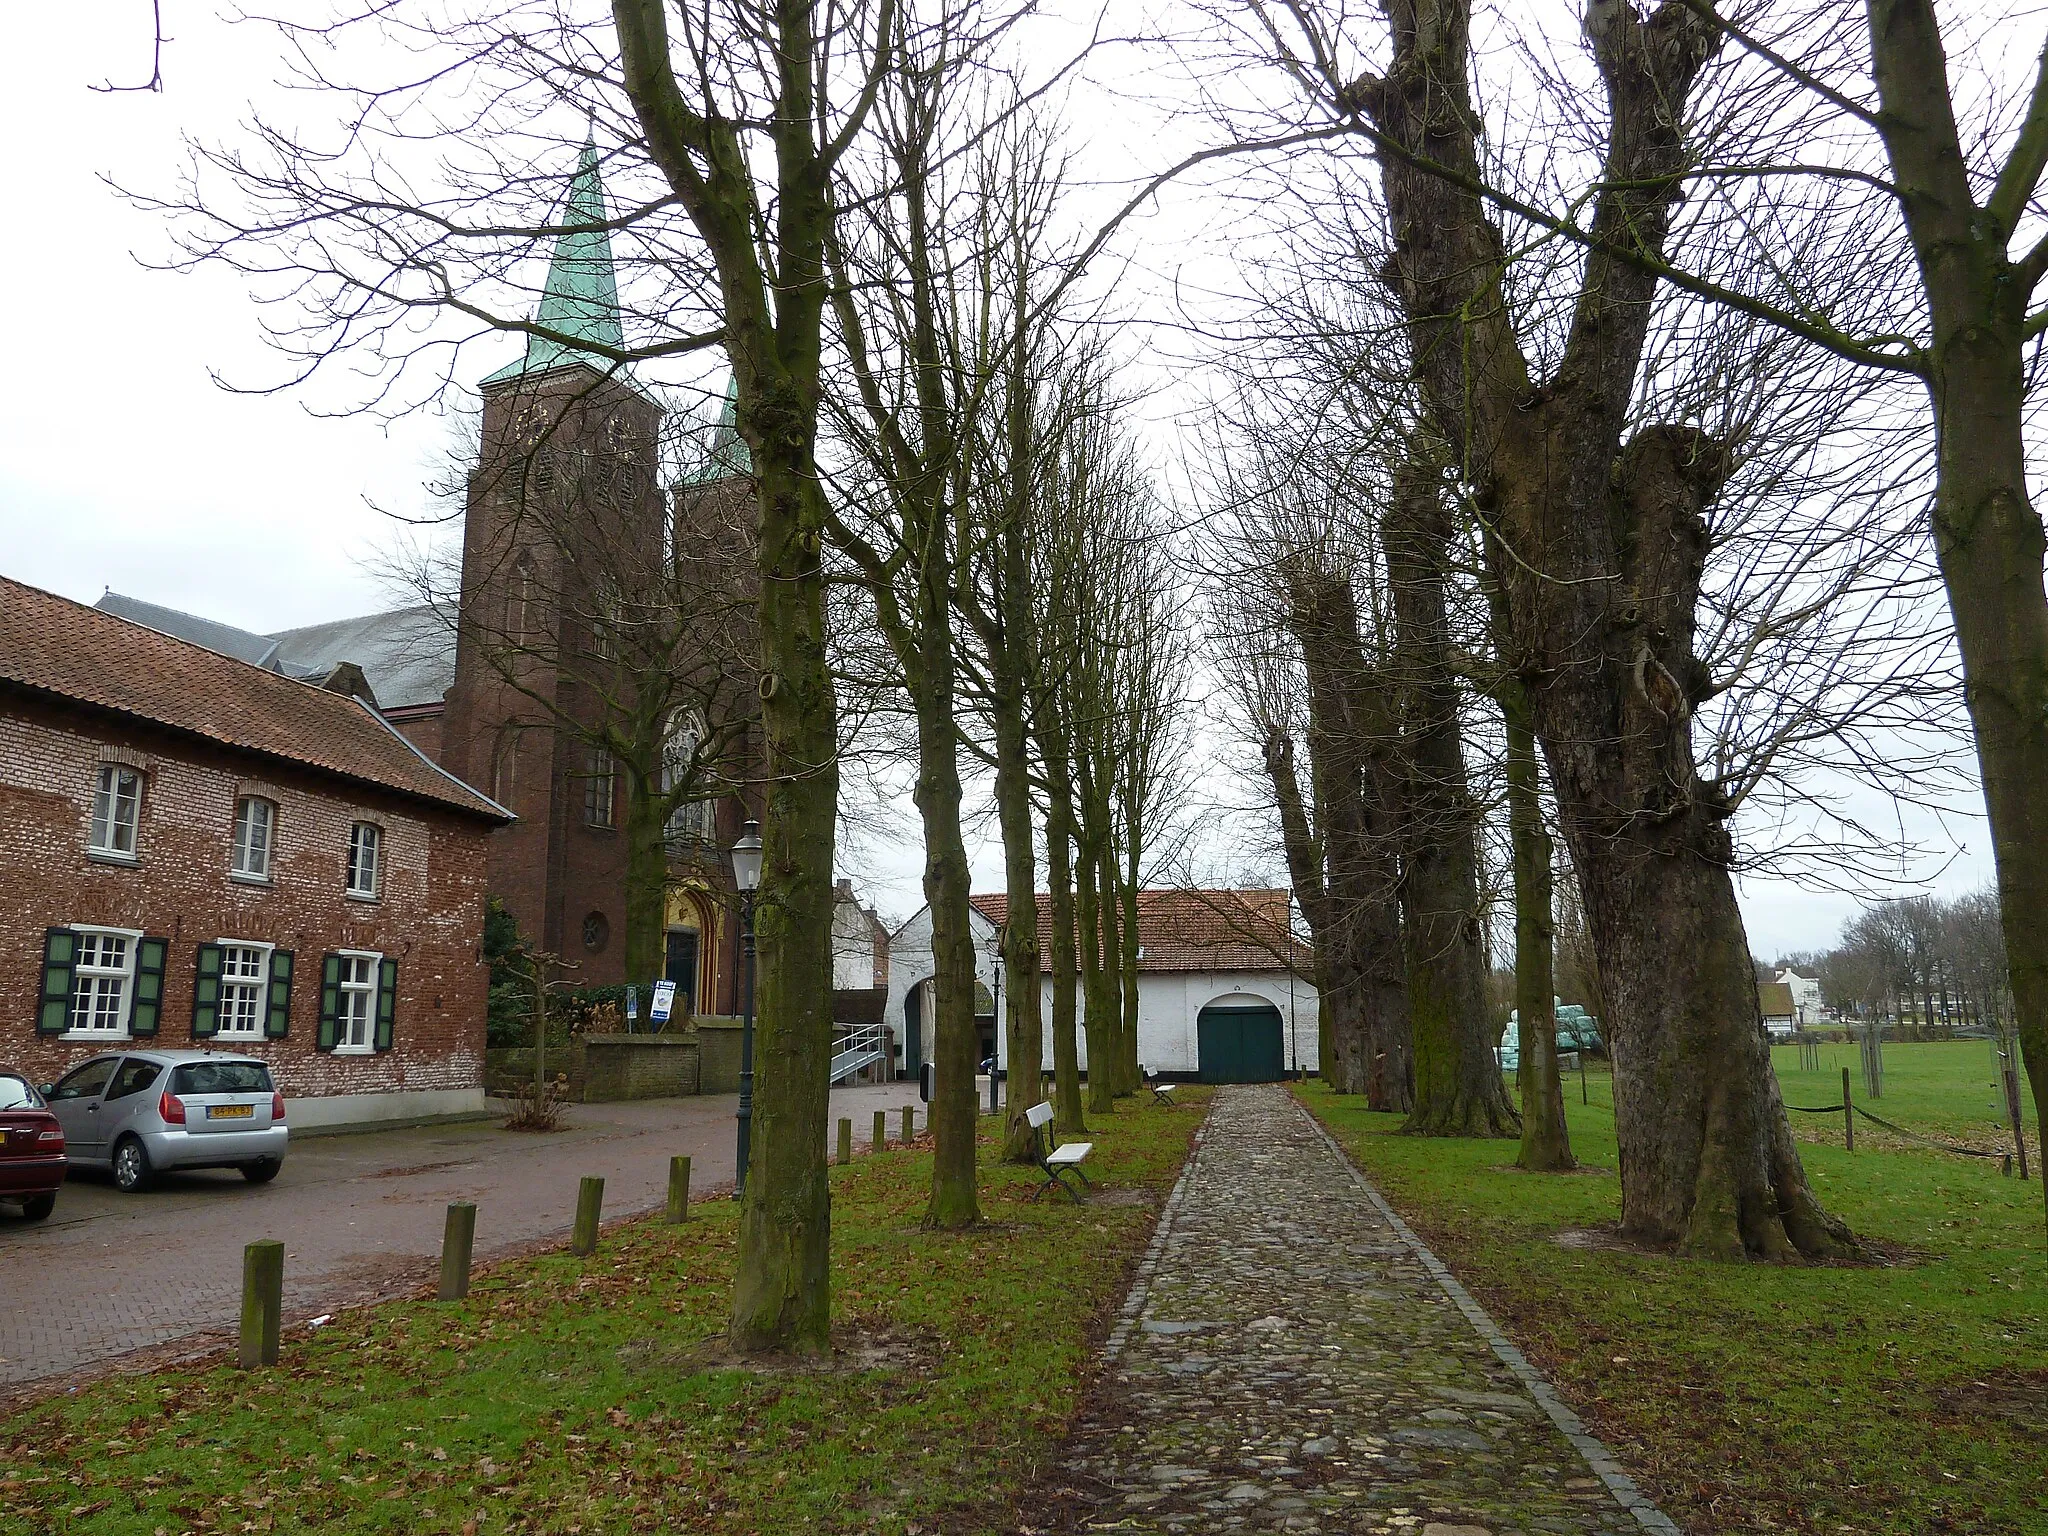 Photo showing: Trees before the church of Amstenrade, Limburg, the Netherlands